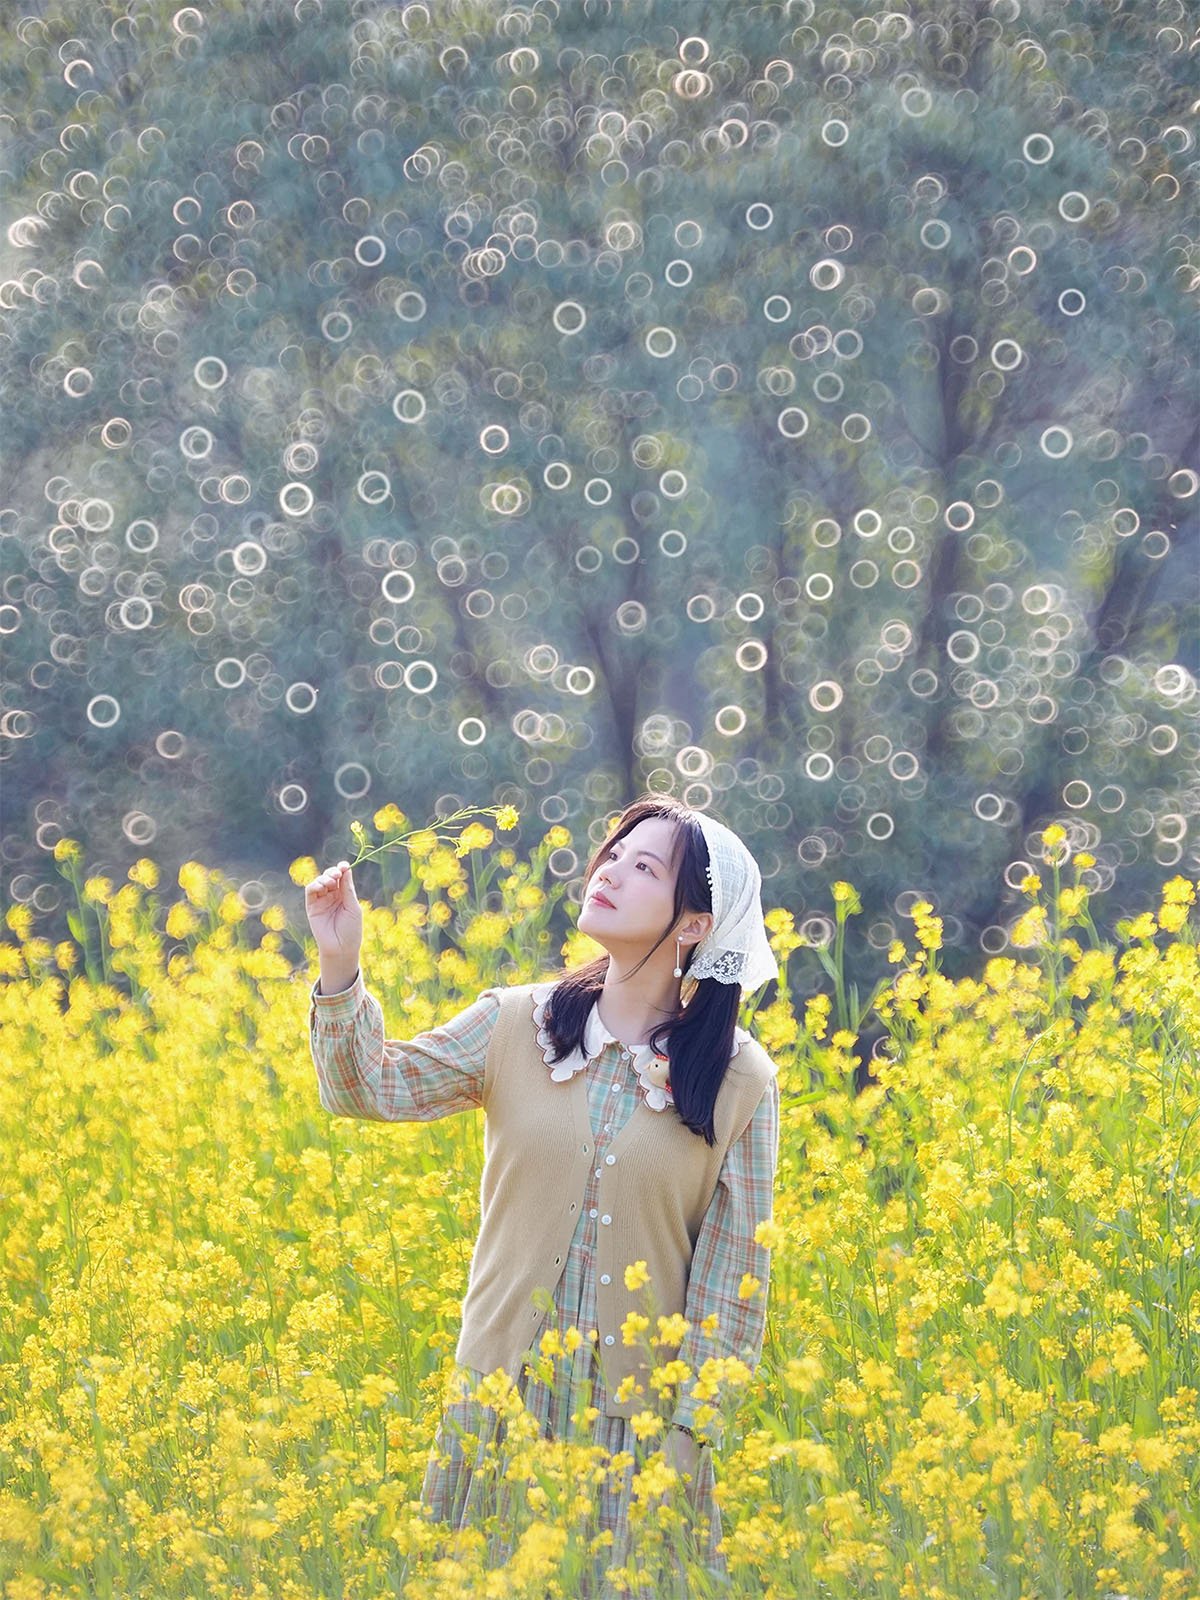 A woman stands in a field of vibrant yellow flowers, holding one close to her face. She wears a light-colored headscarf and a beige vest over a plaid shirt. The background features a dreamy, bokeh effect with circular light patterns and blurry trees.